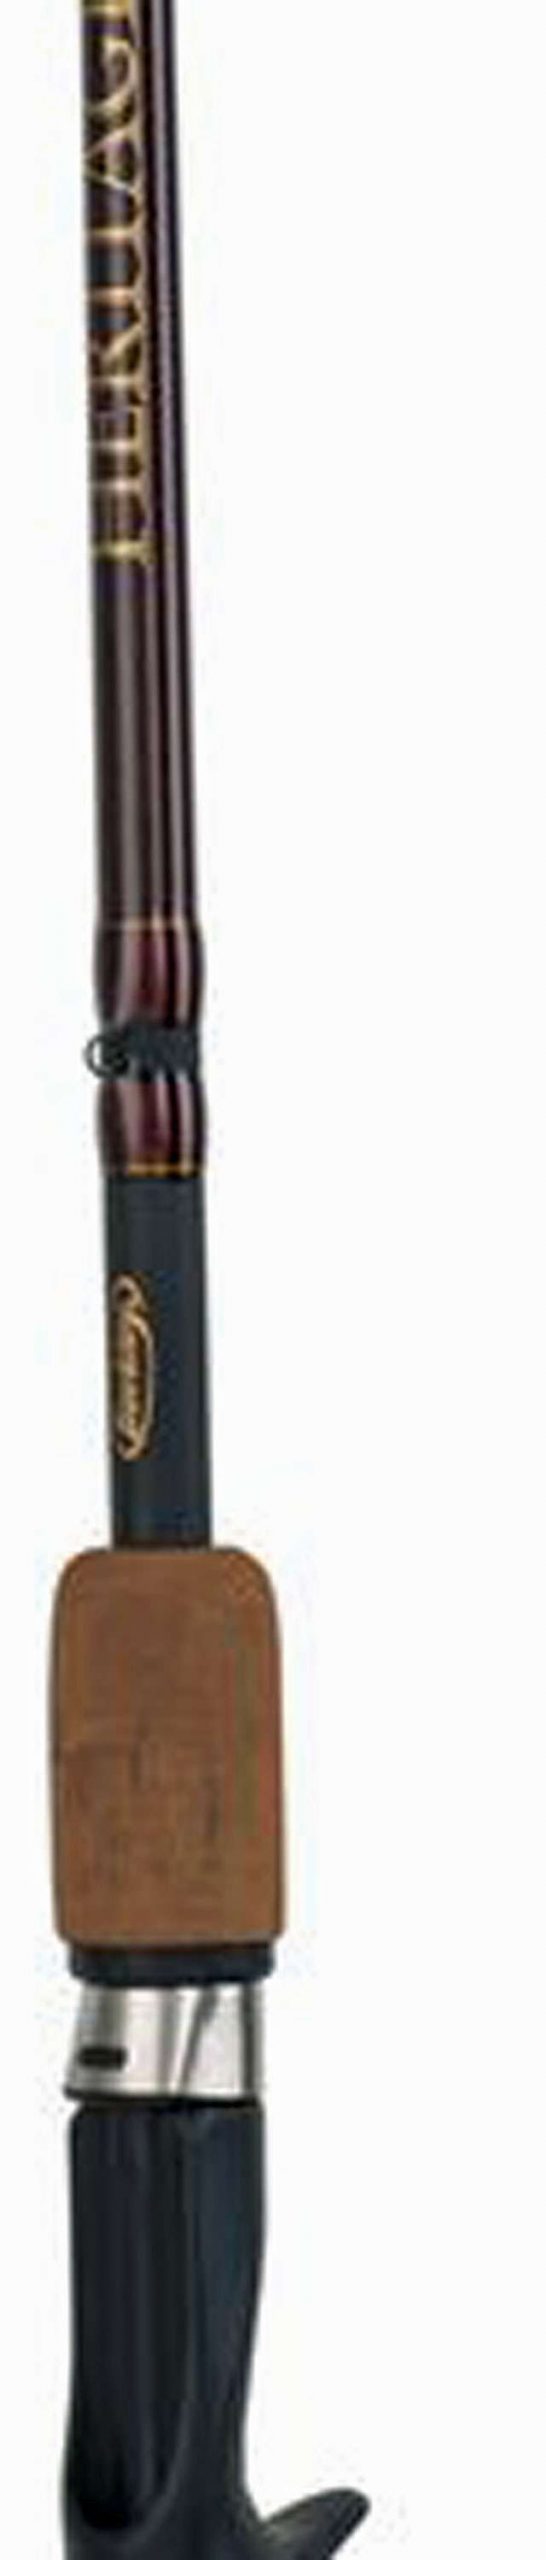 <p>Berkley Heritage The Berkley Heritage line of casting rods will be endeared to anglers who value a reasonable price as well as performance.</p>
